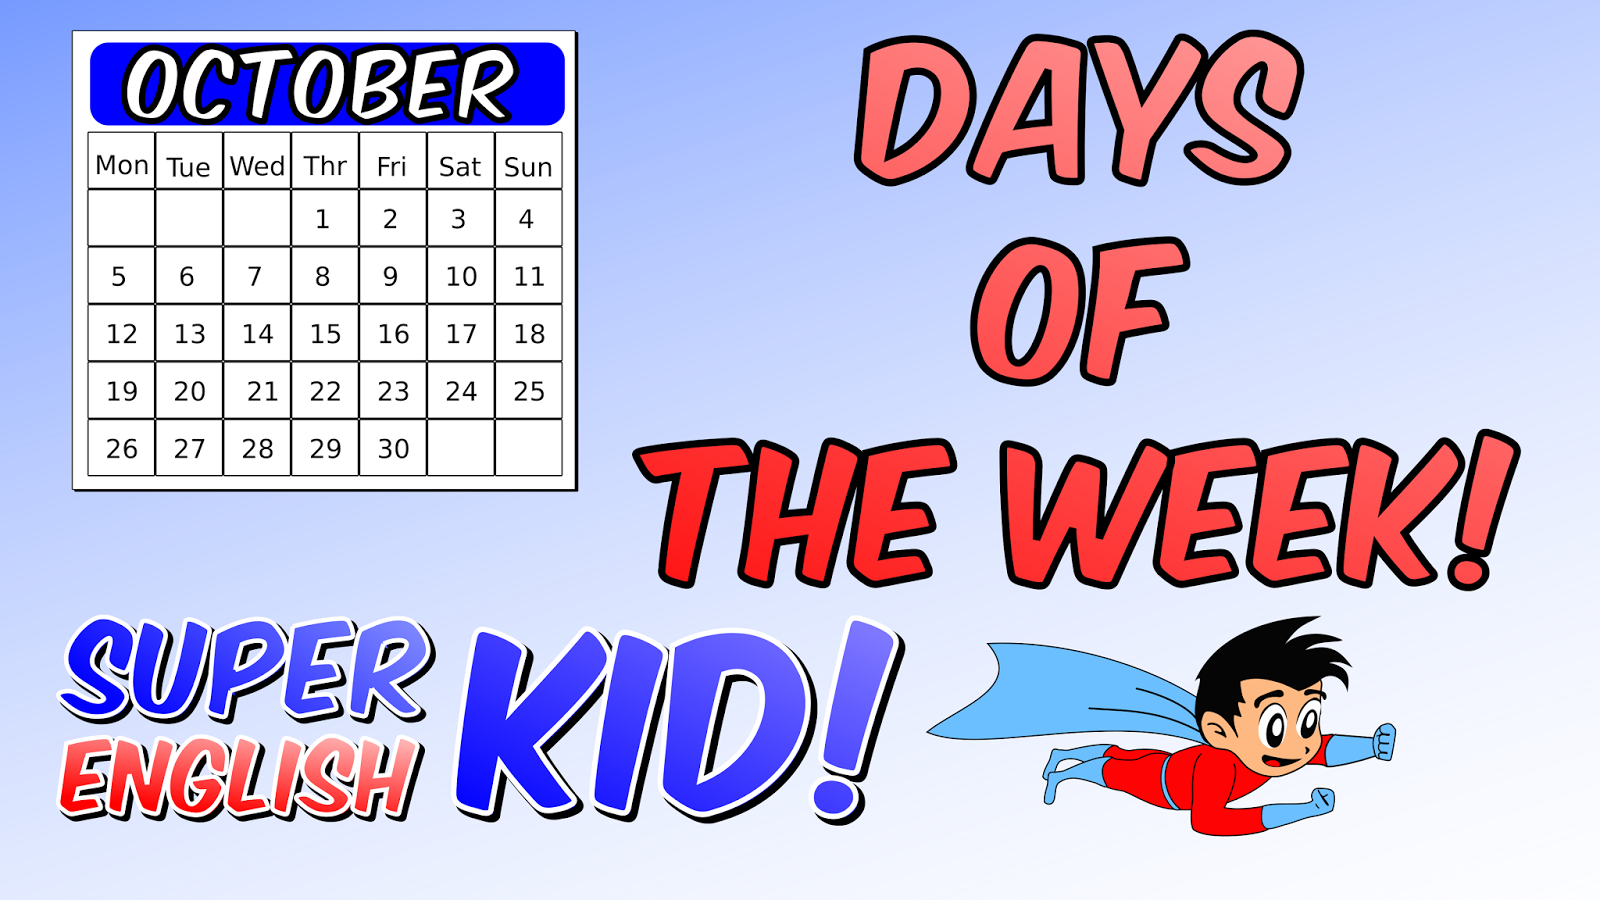 Days of the week for kids song. Days of the week. Days of the week Song. 7 Days of the week Song for Kids. Days of the week super simple Songs.